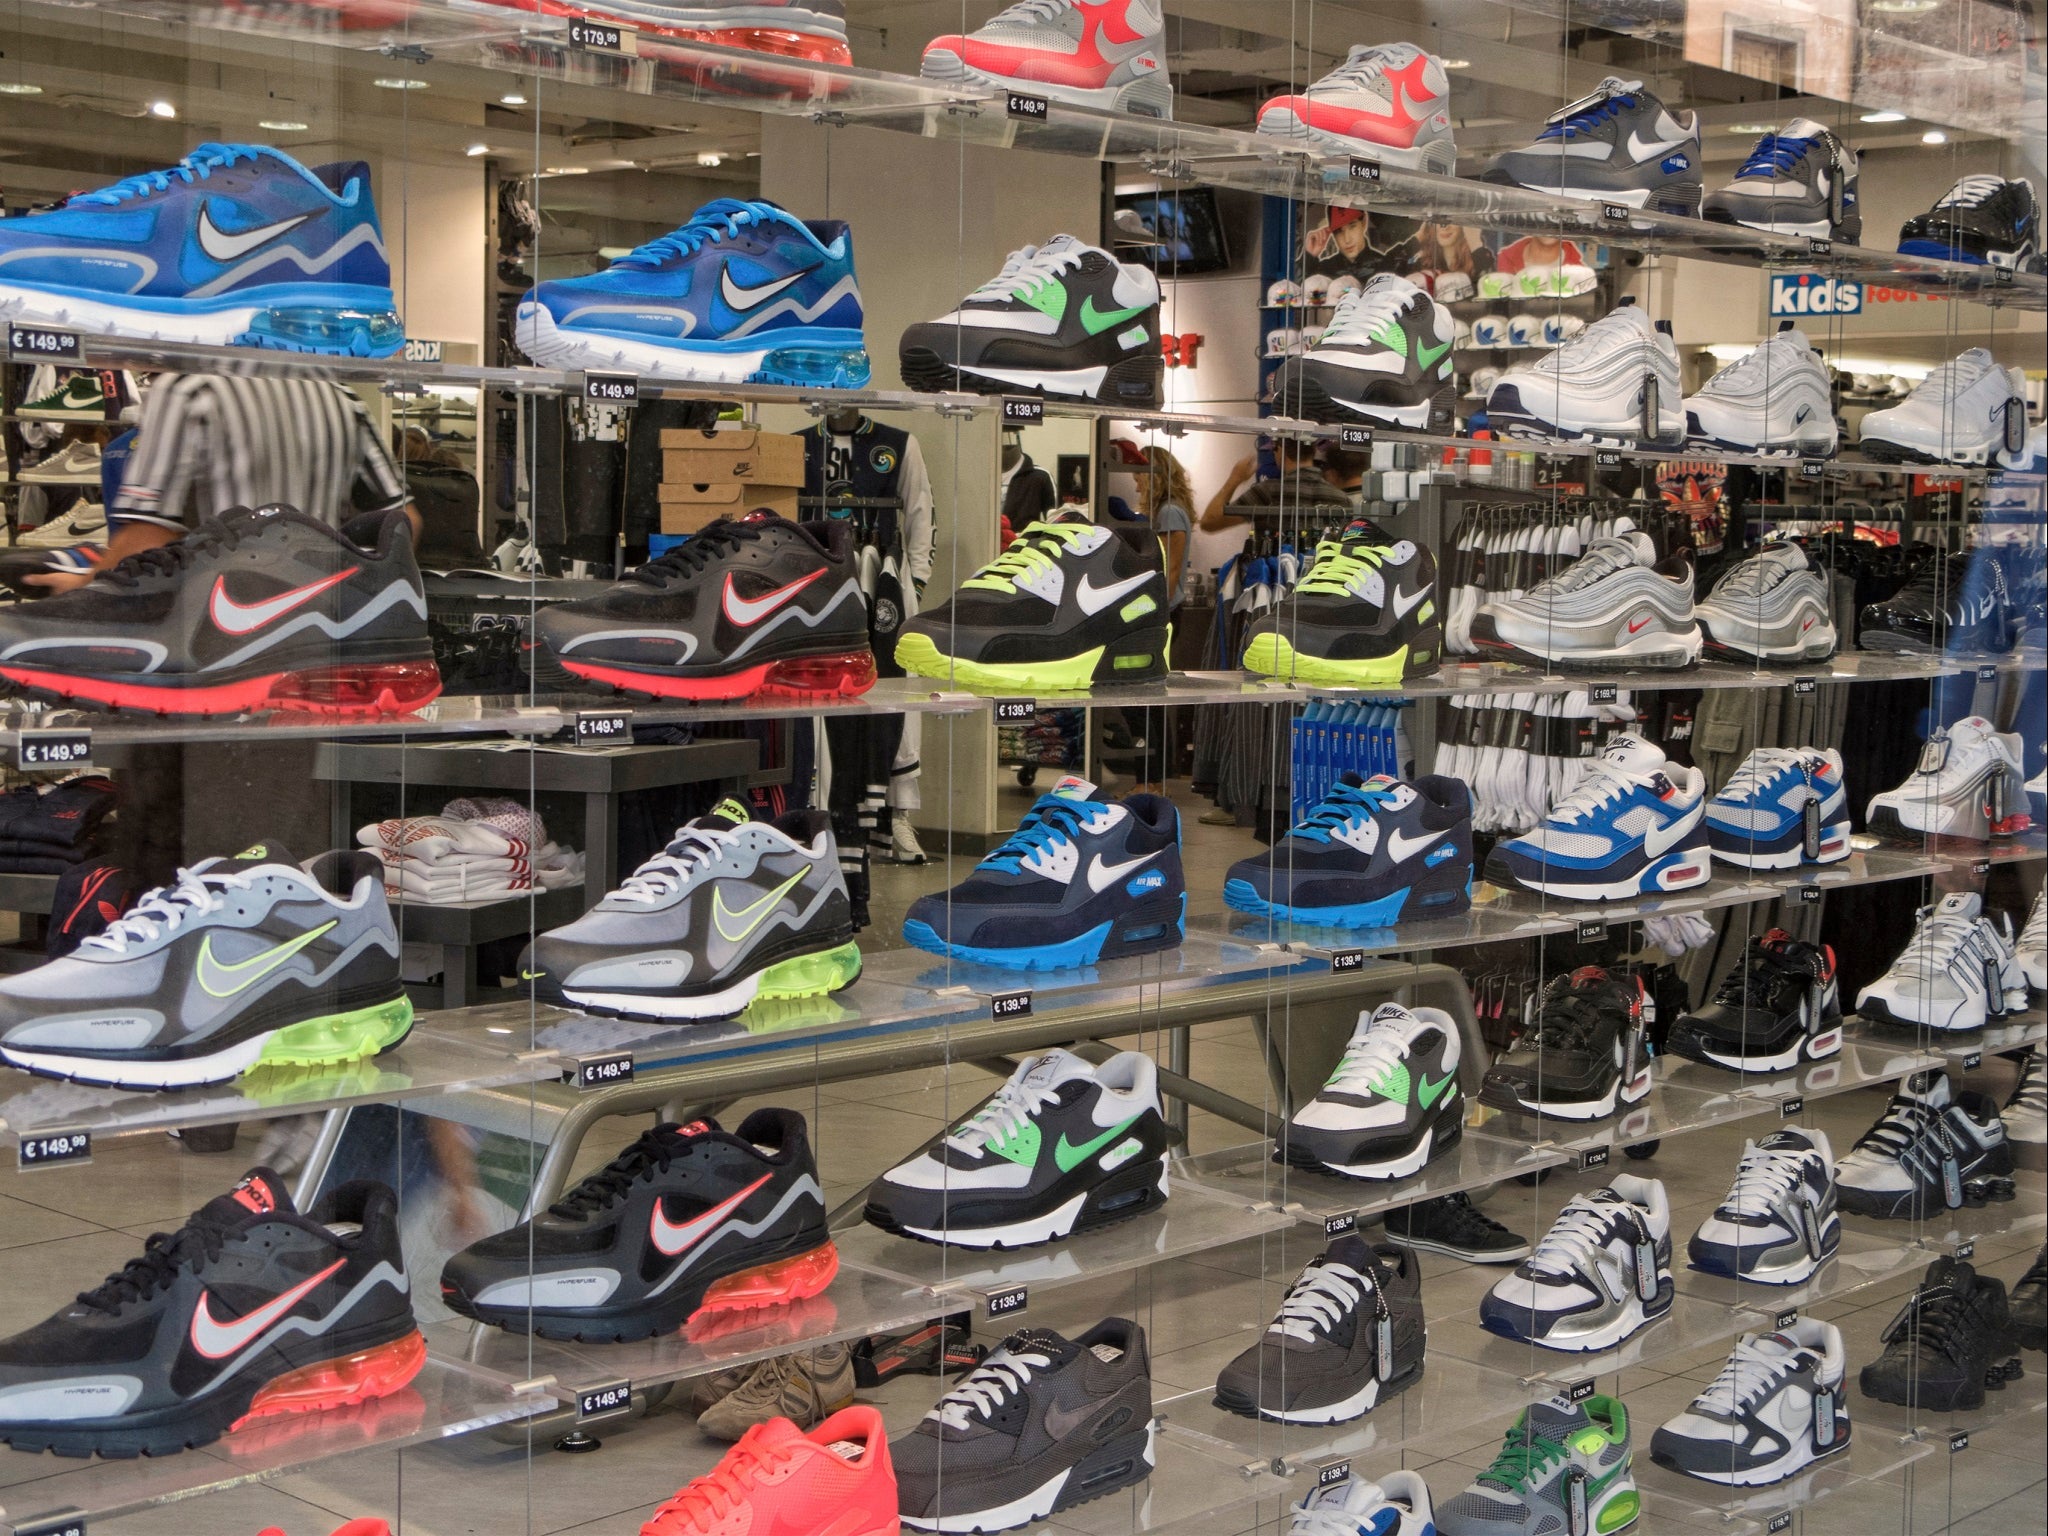 Covid outbreaks have hit two major Nike suppliers in Vietnam